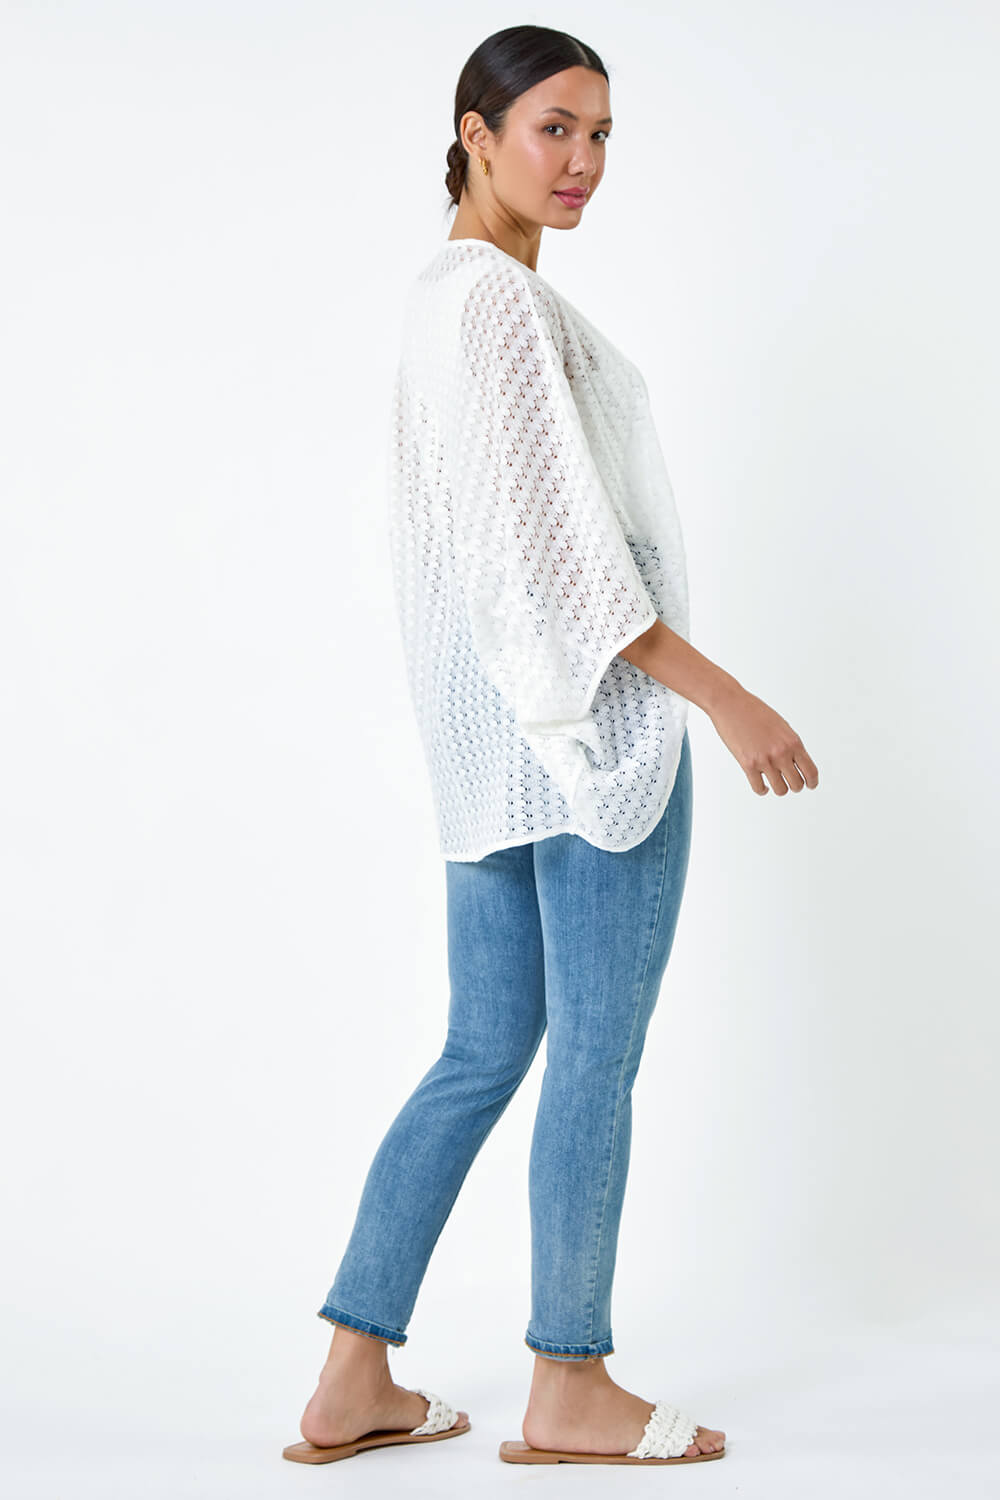 White Textured Knit Cardigan Cover Up, Image 3 of 5